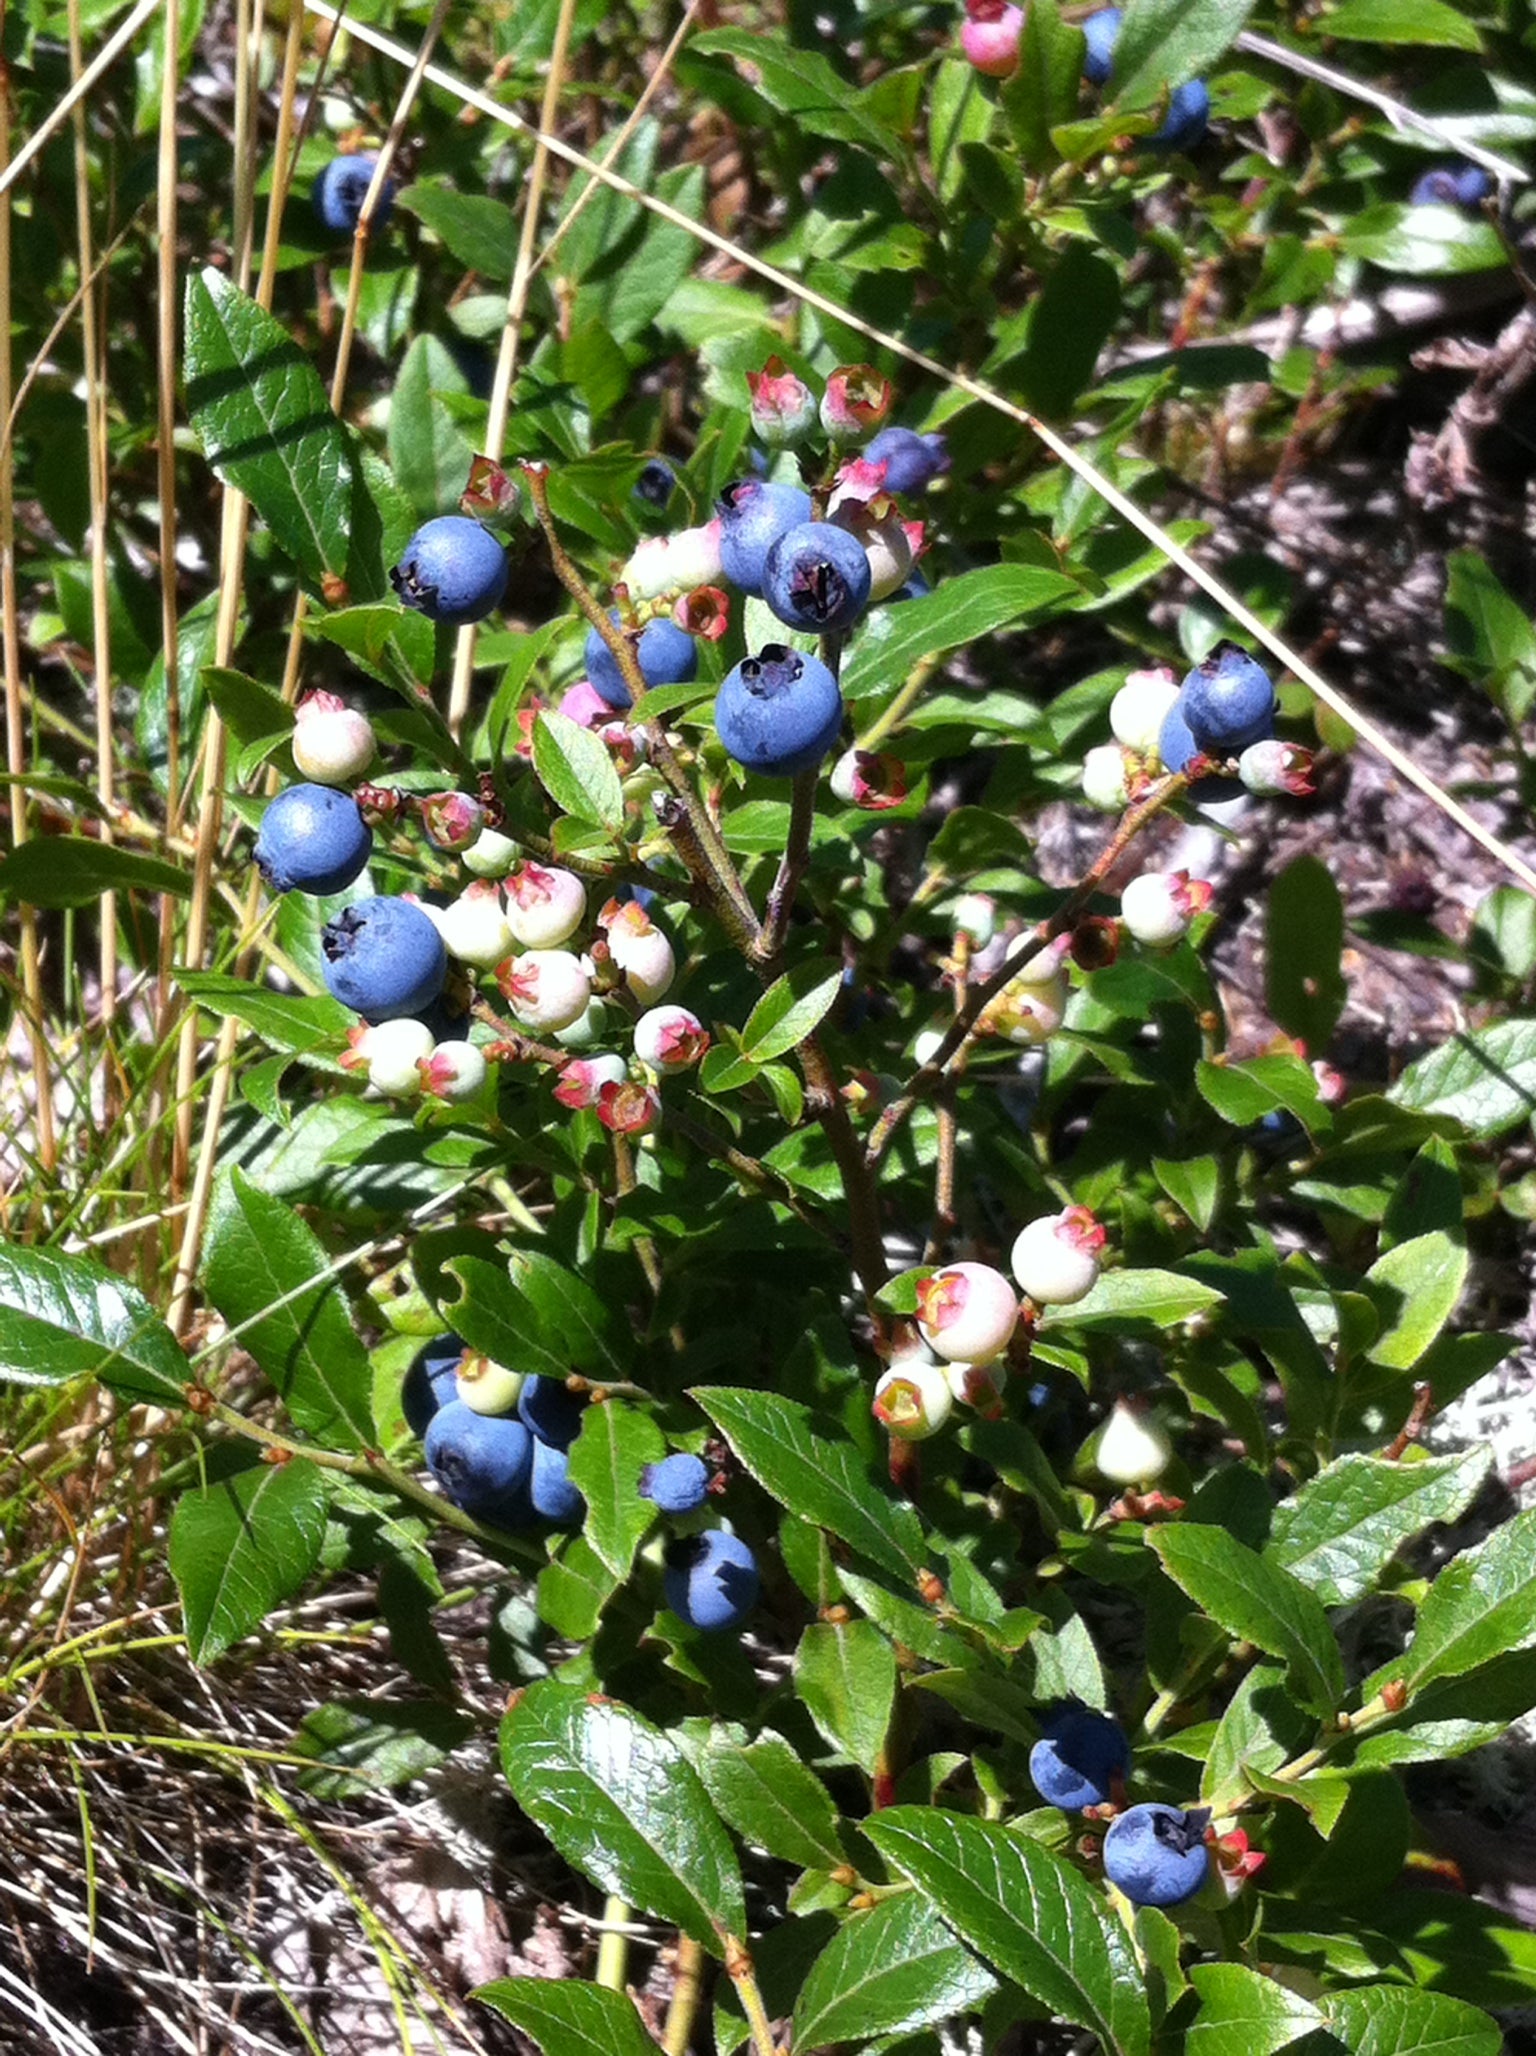 A carpet of wild blueberries